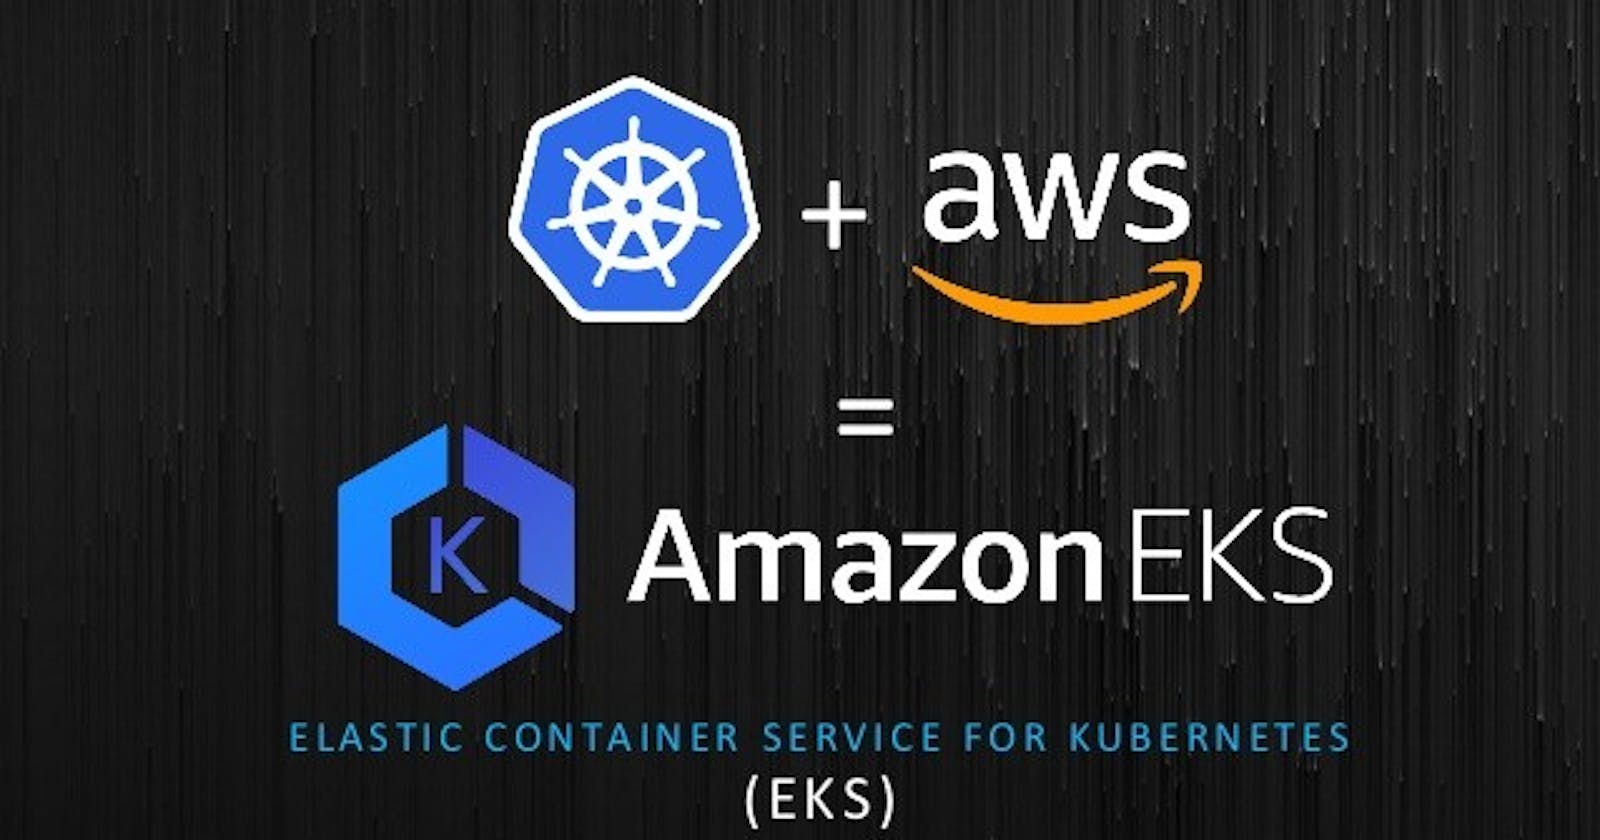 Set Up Your EKS Cluster With Ease.